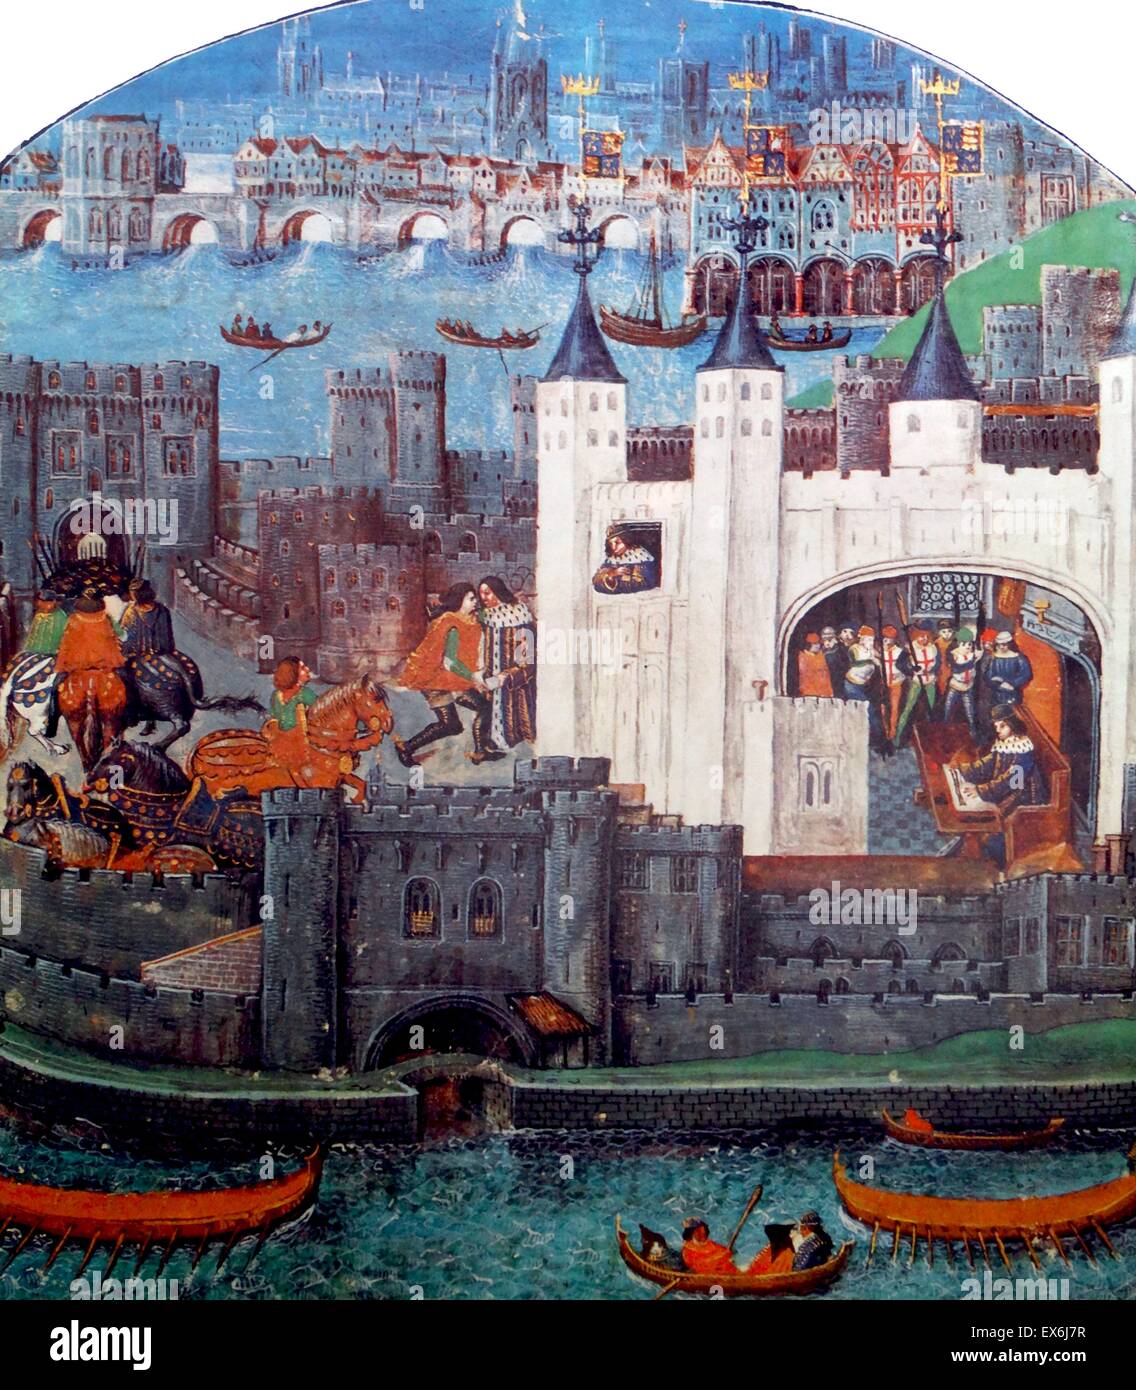 The Tower of London, a manuscript illustration from the Poems of Charles,  Duke of Orleans. Charles d'Orleans was imprisoned in the Tower after his  capture at Agincourt. From The Island Race, a